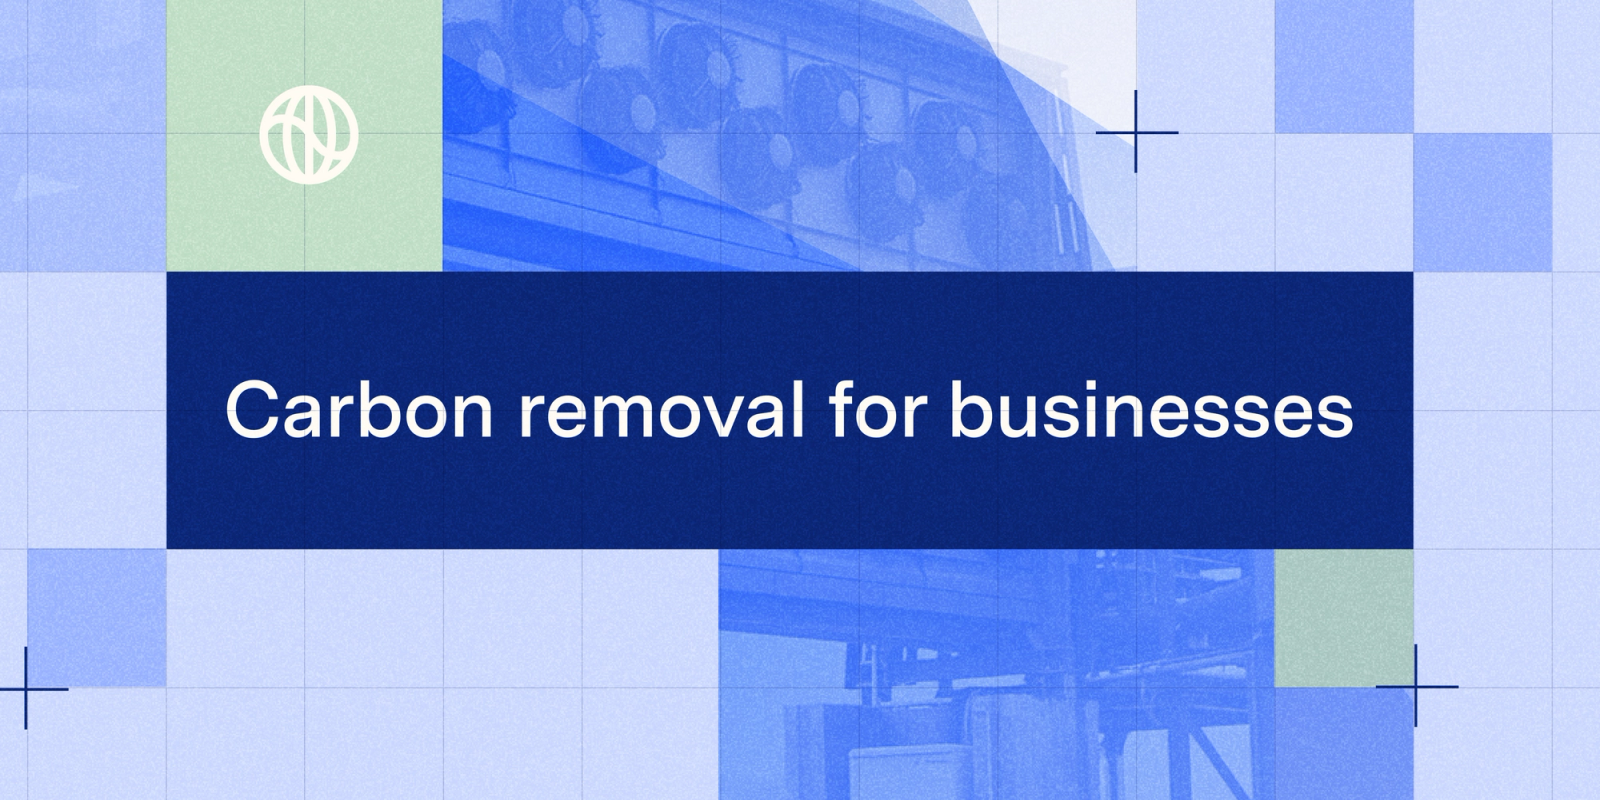 Image with text "Carbon removal for businesses"